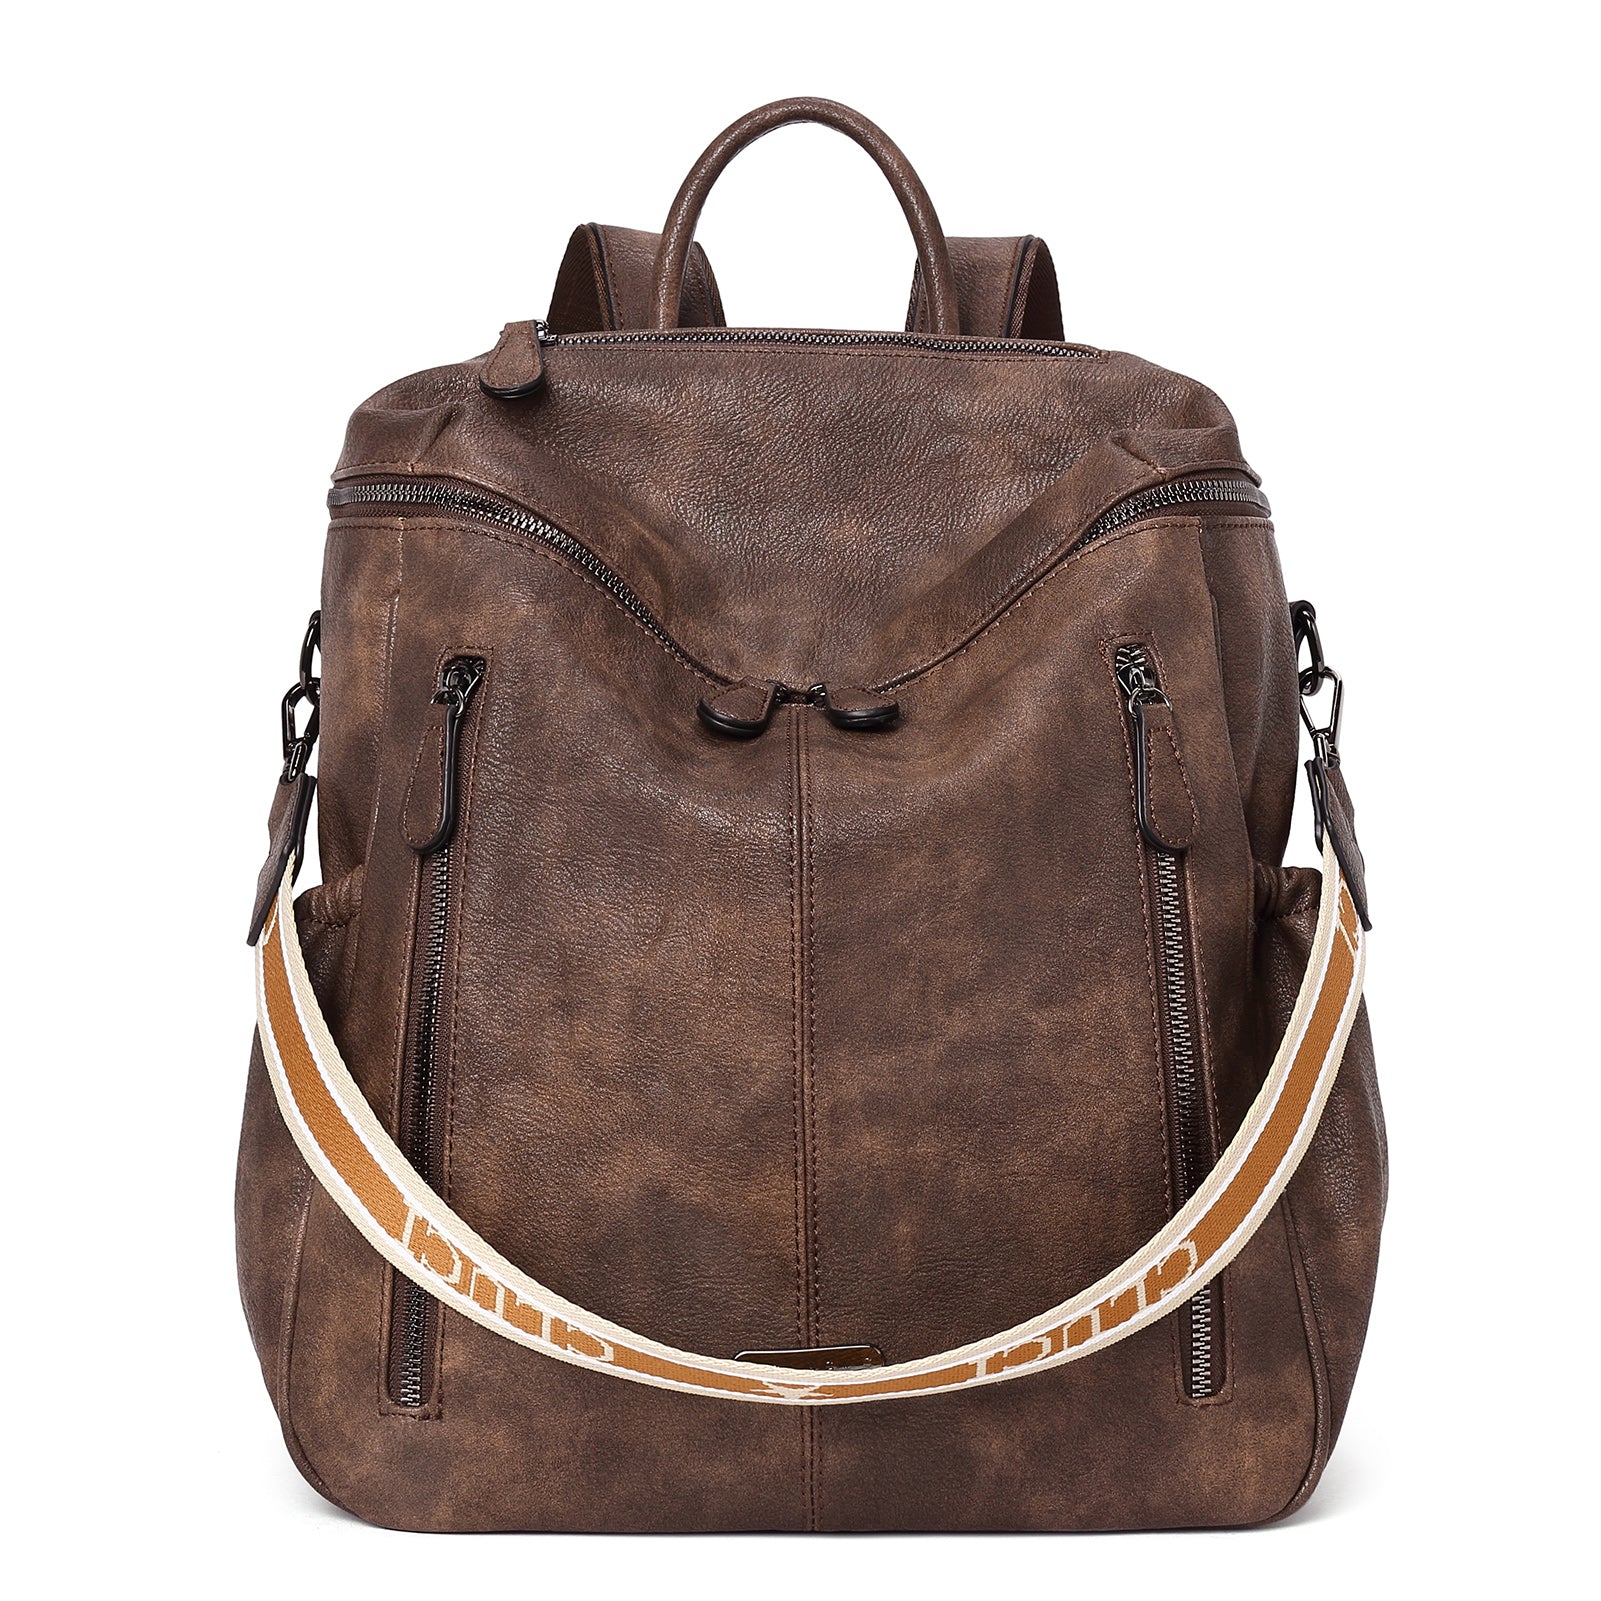 creeper Leather Backpack Purse for Women and Girls with Sling Bags - Brown  : Amazon.in: Fashion